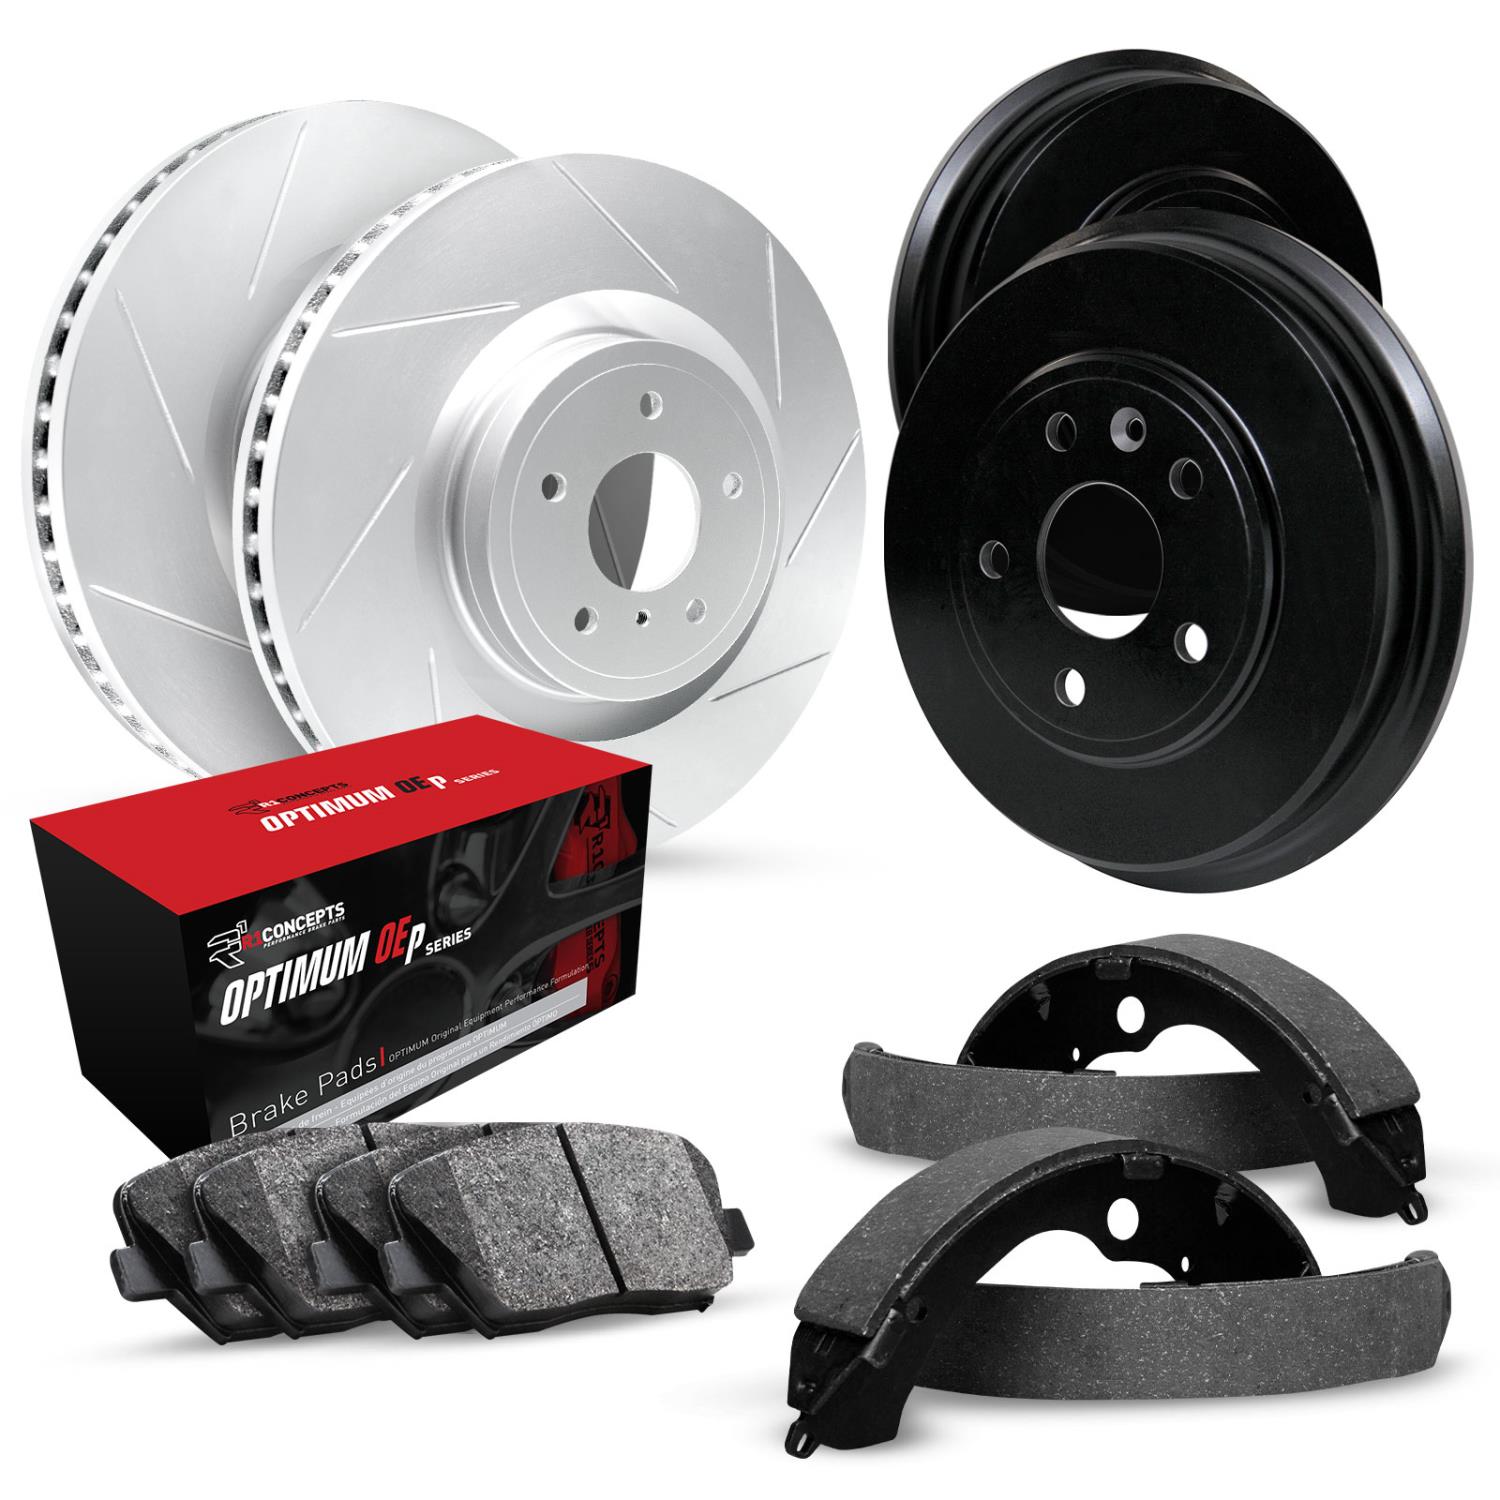 GEO-Carbon Slotted Brake Rotor & Drum Set w/Optimum OE Pads & Shoes, 2001-2005 Ford/Lincoln/Mercury/Mazda